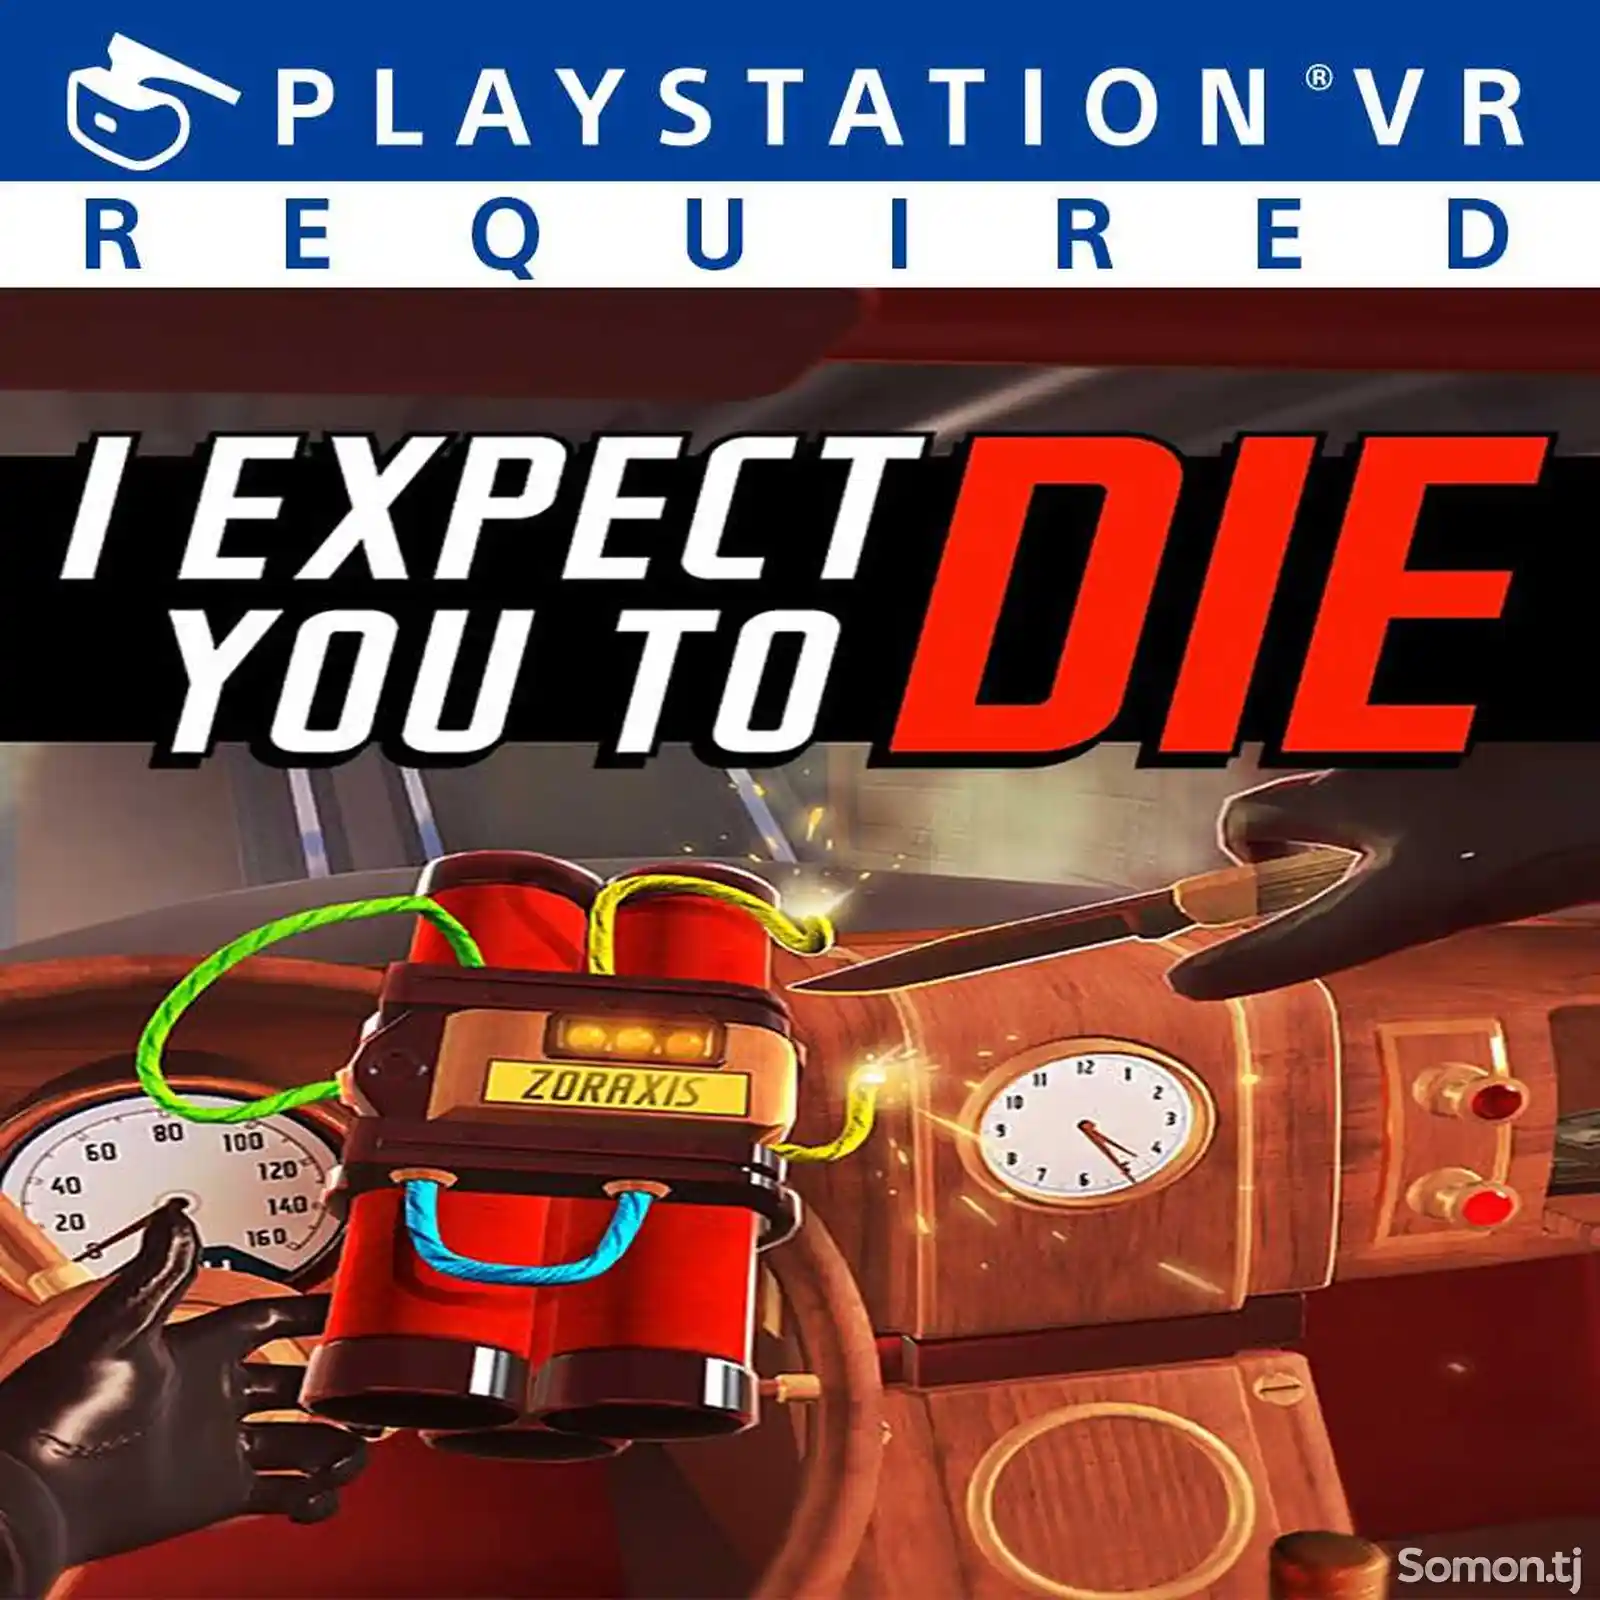 Игра VR I expect you die для PS-4 / 5.05 / 6.72 / 7.02 / 7.55 / 9.00 /-1